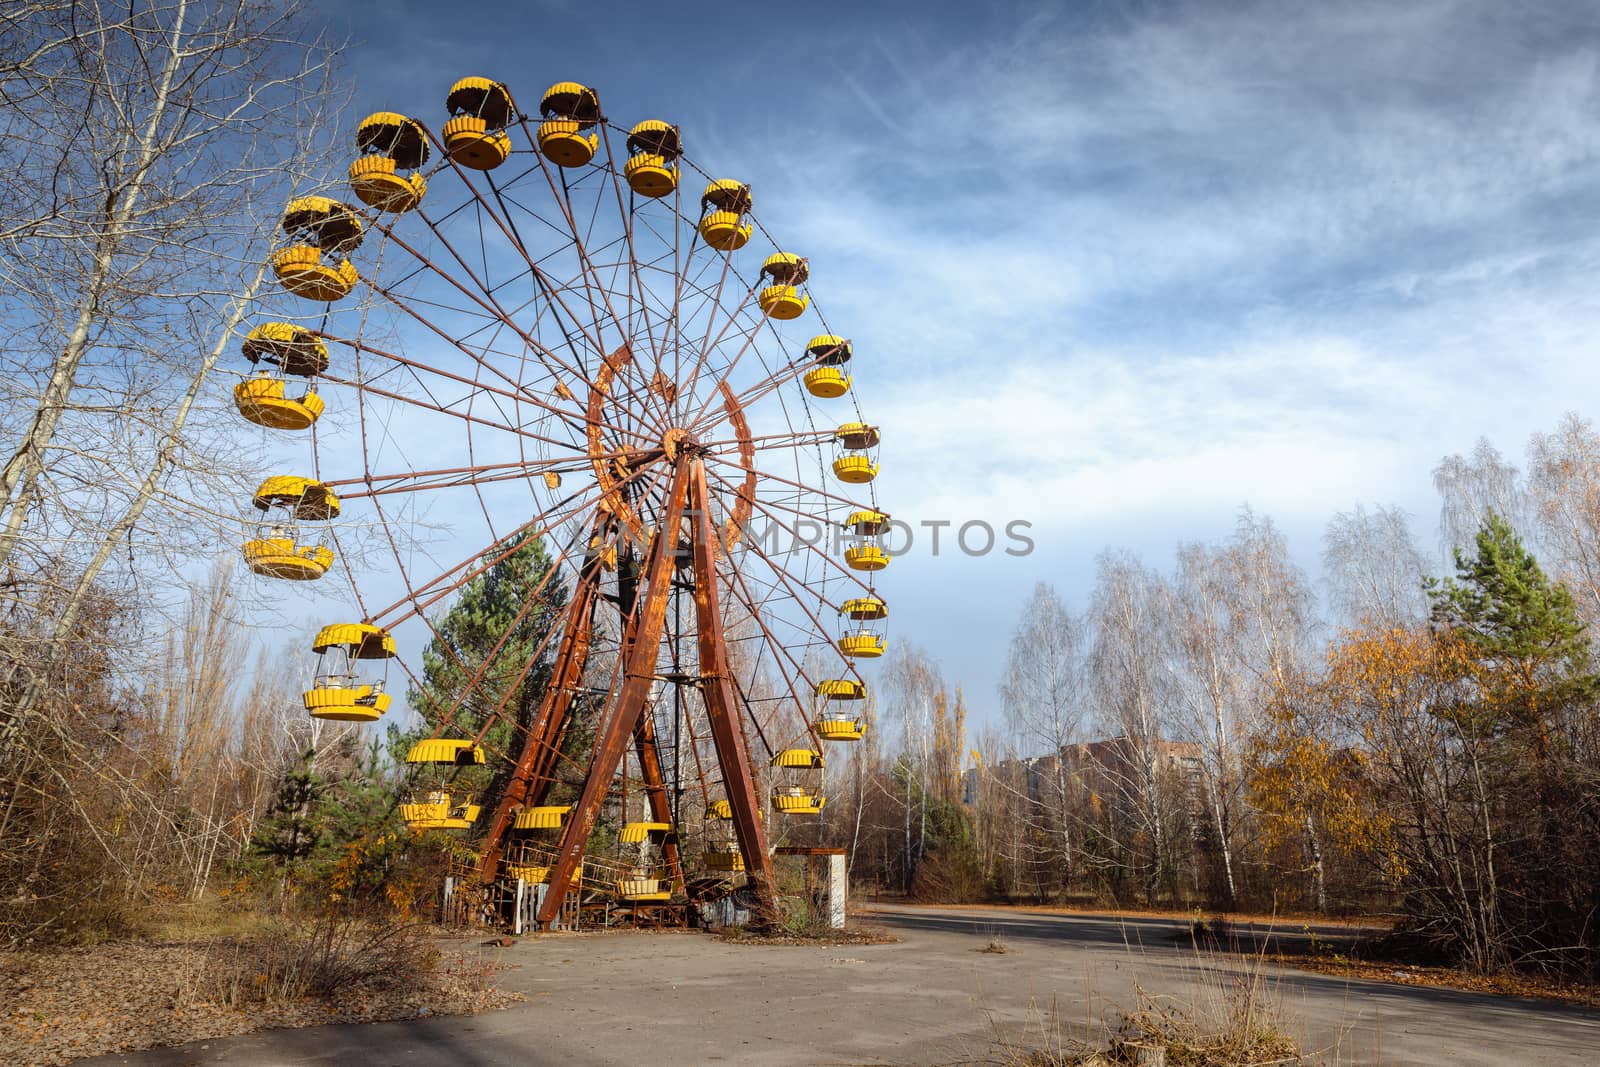 Ferris wheel of Pripyat ghost town 2019 by svedoliver